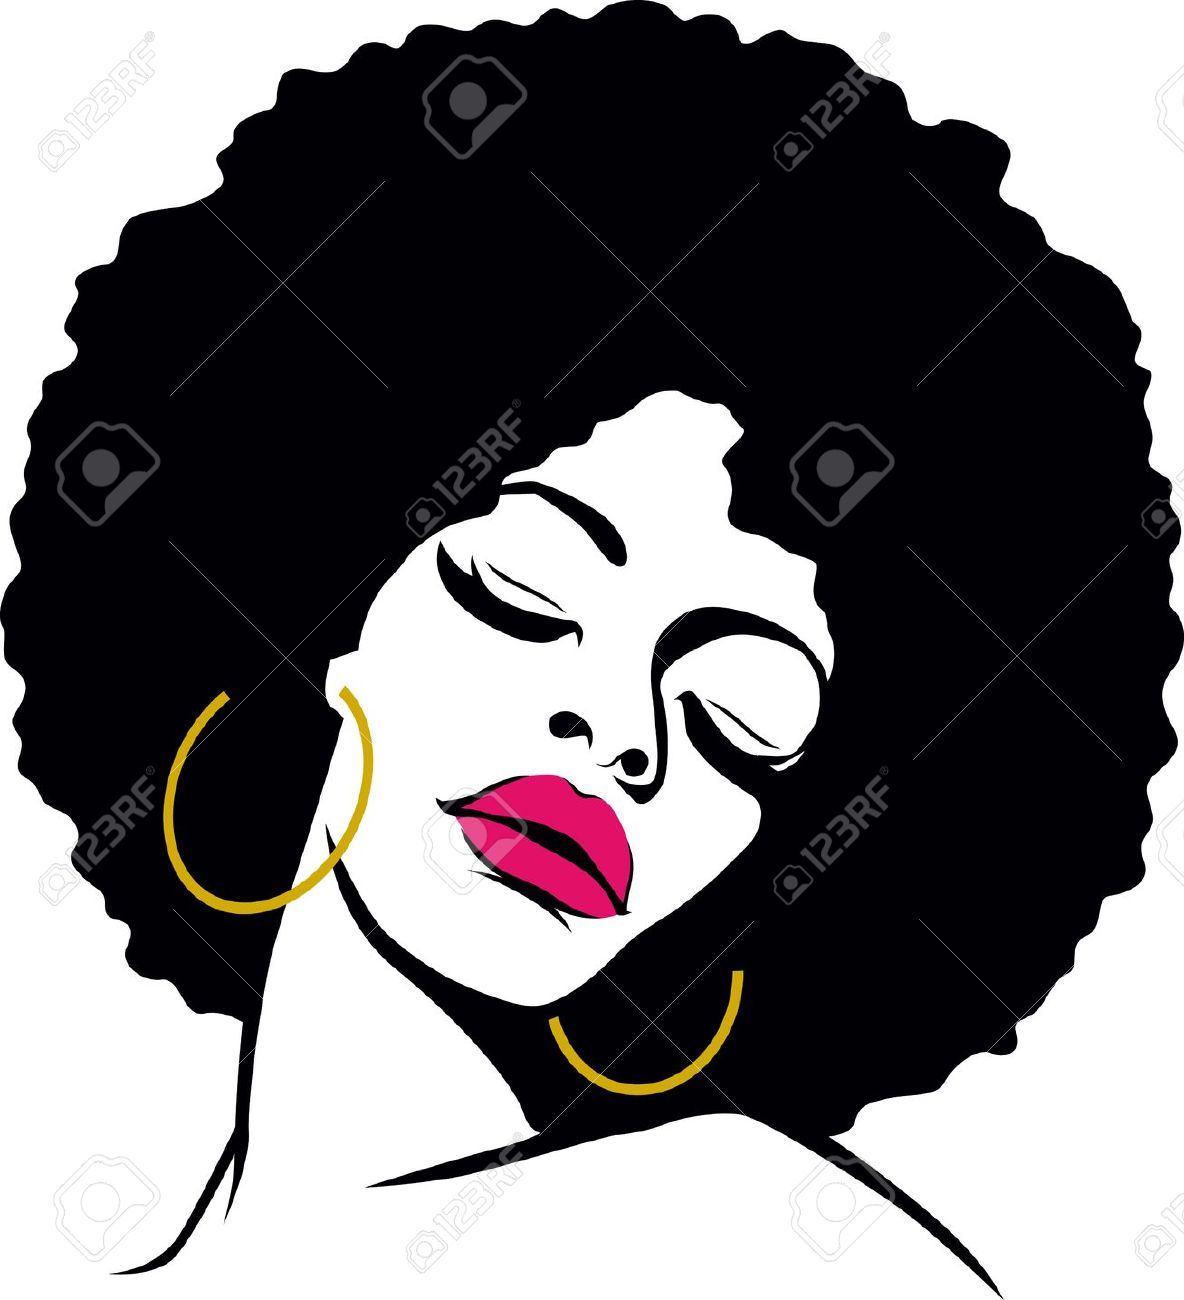 6,697 Afro Stock Vector Illustration And Royalty Free Afro Clipart.